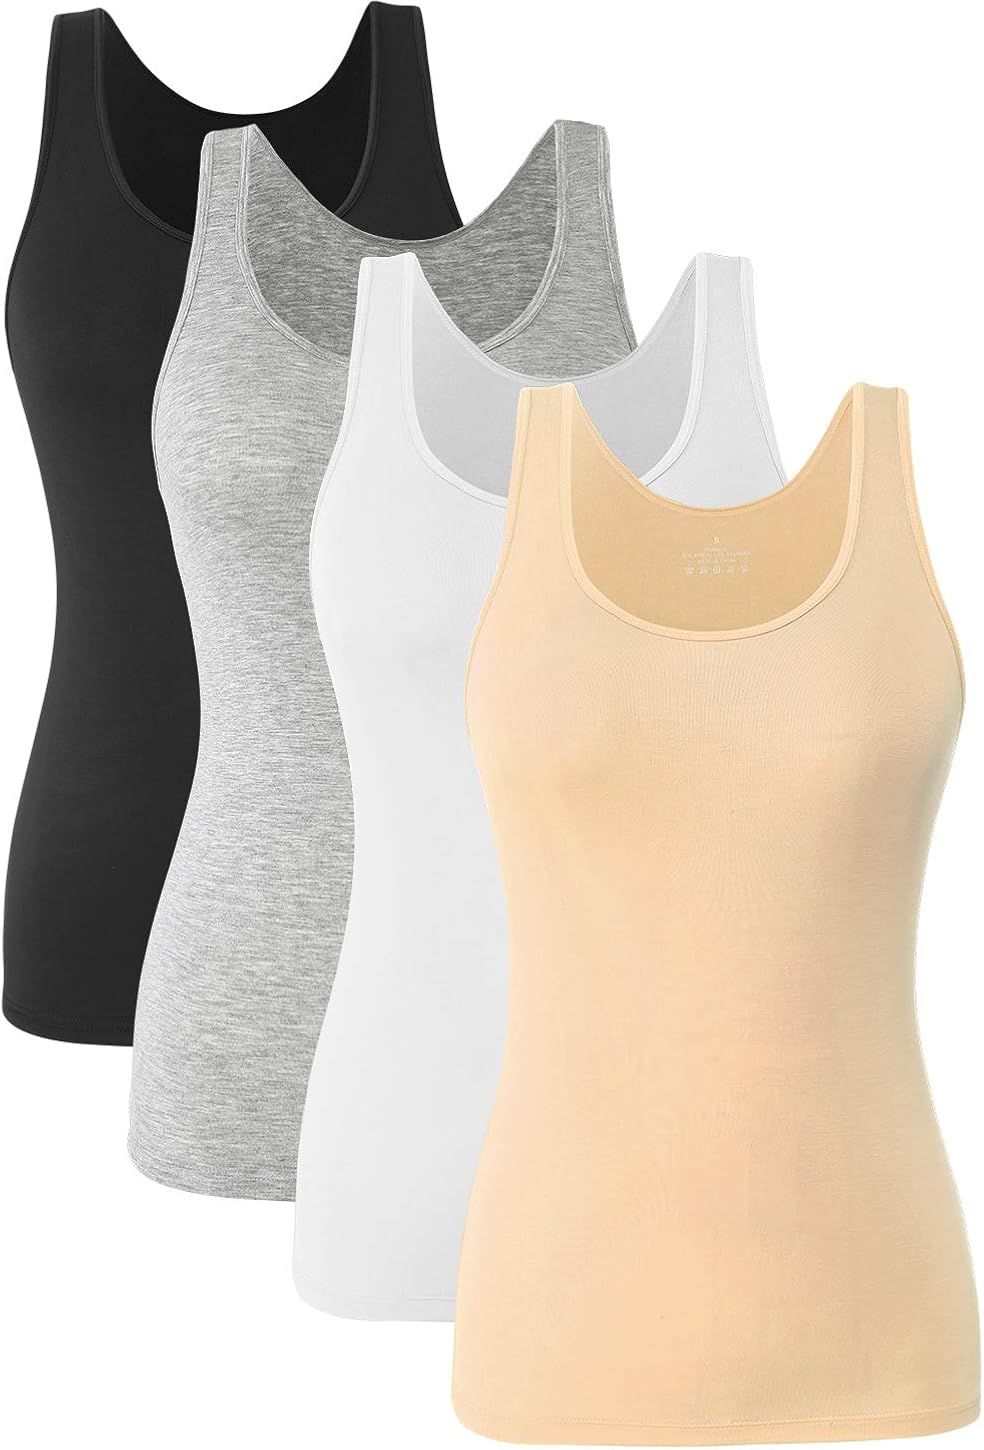 Orrpally Basic Tank Tops for Women Undershirts Tanks Tops Lightweight Camis Tank Tops 4-Pack | Amazon (US)